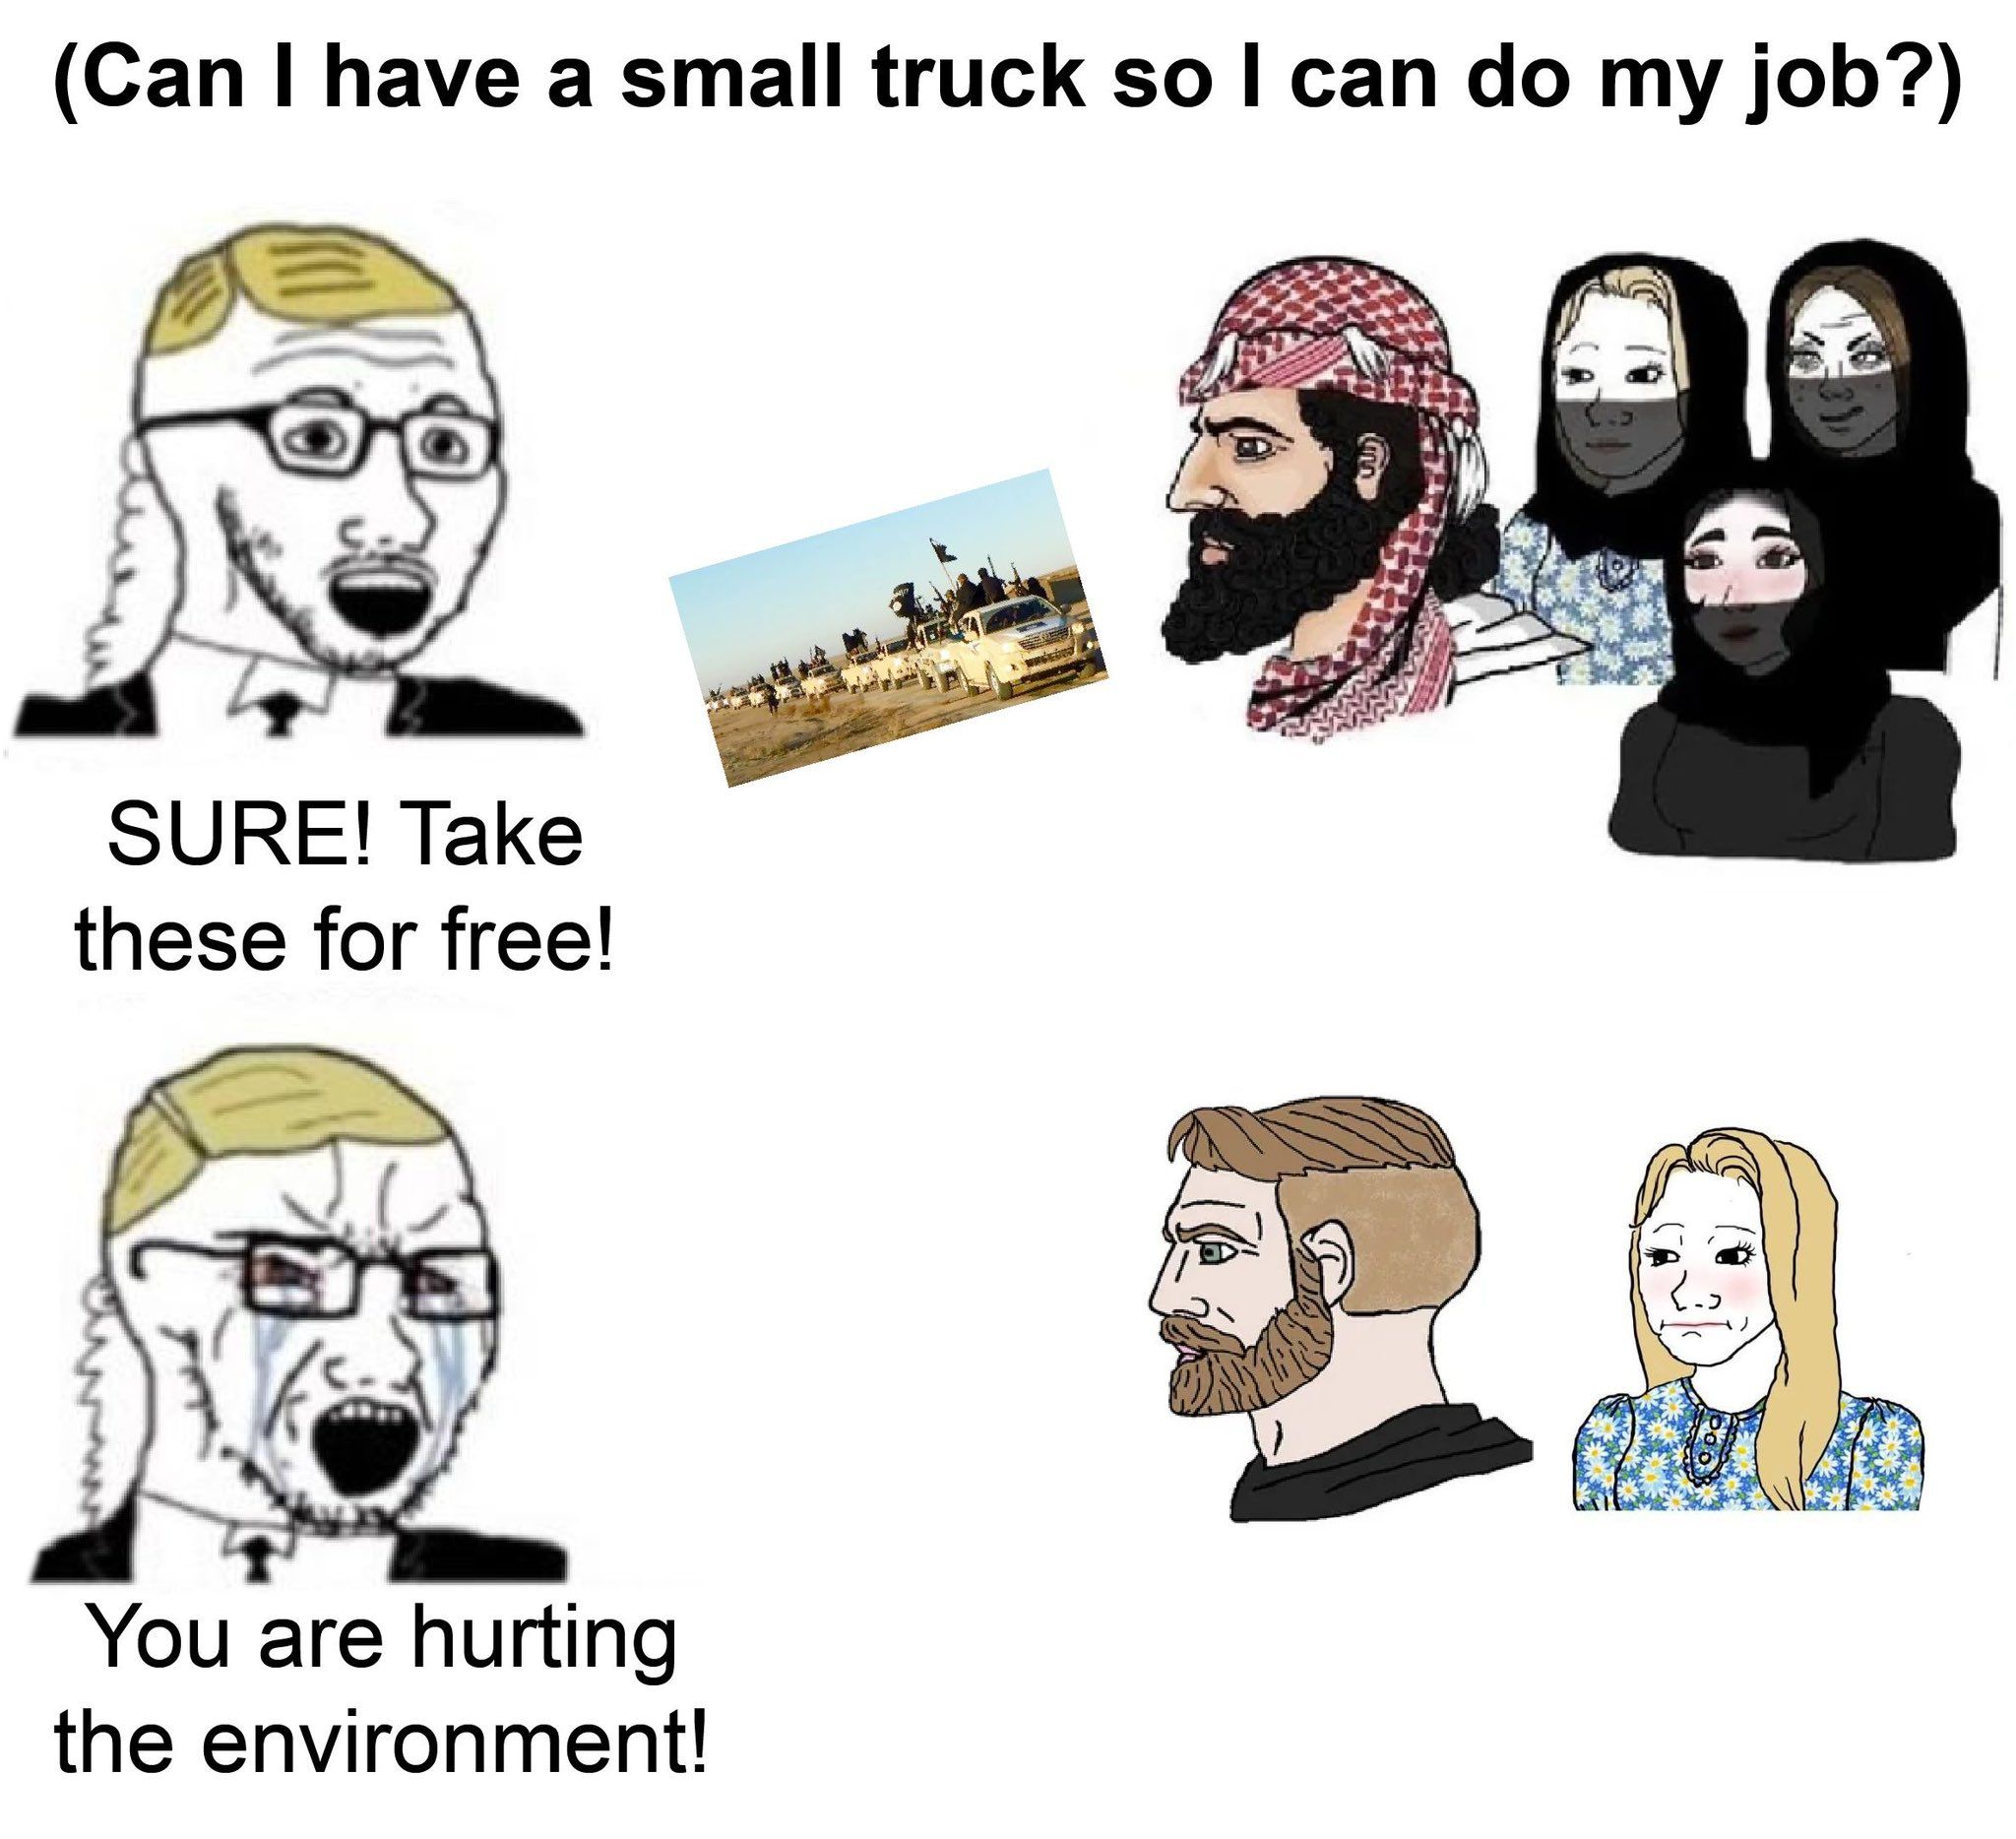 diversity is jews giving Japanese pickup trucks to arabs, payed with the tax money of white people